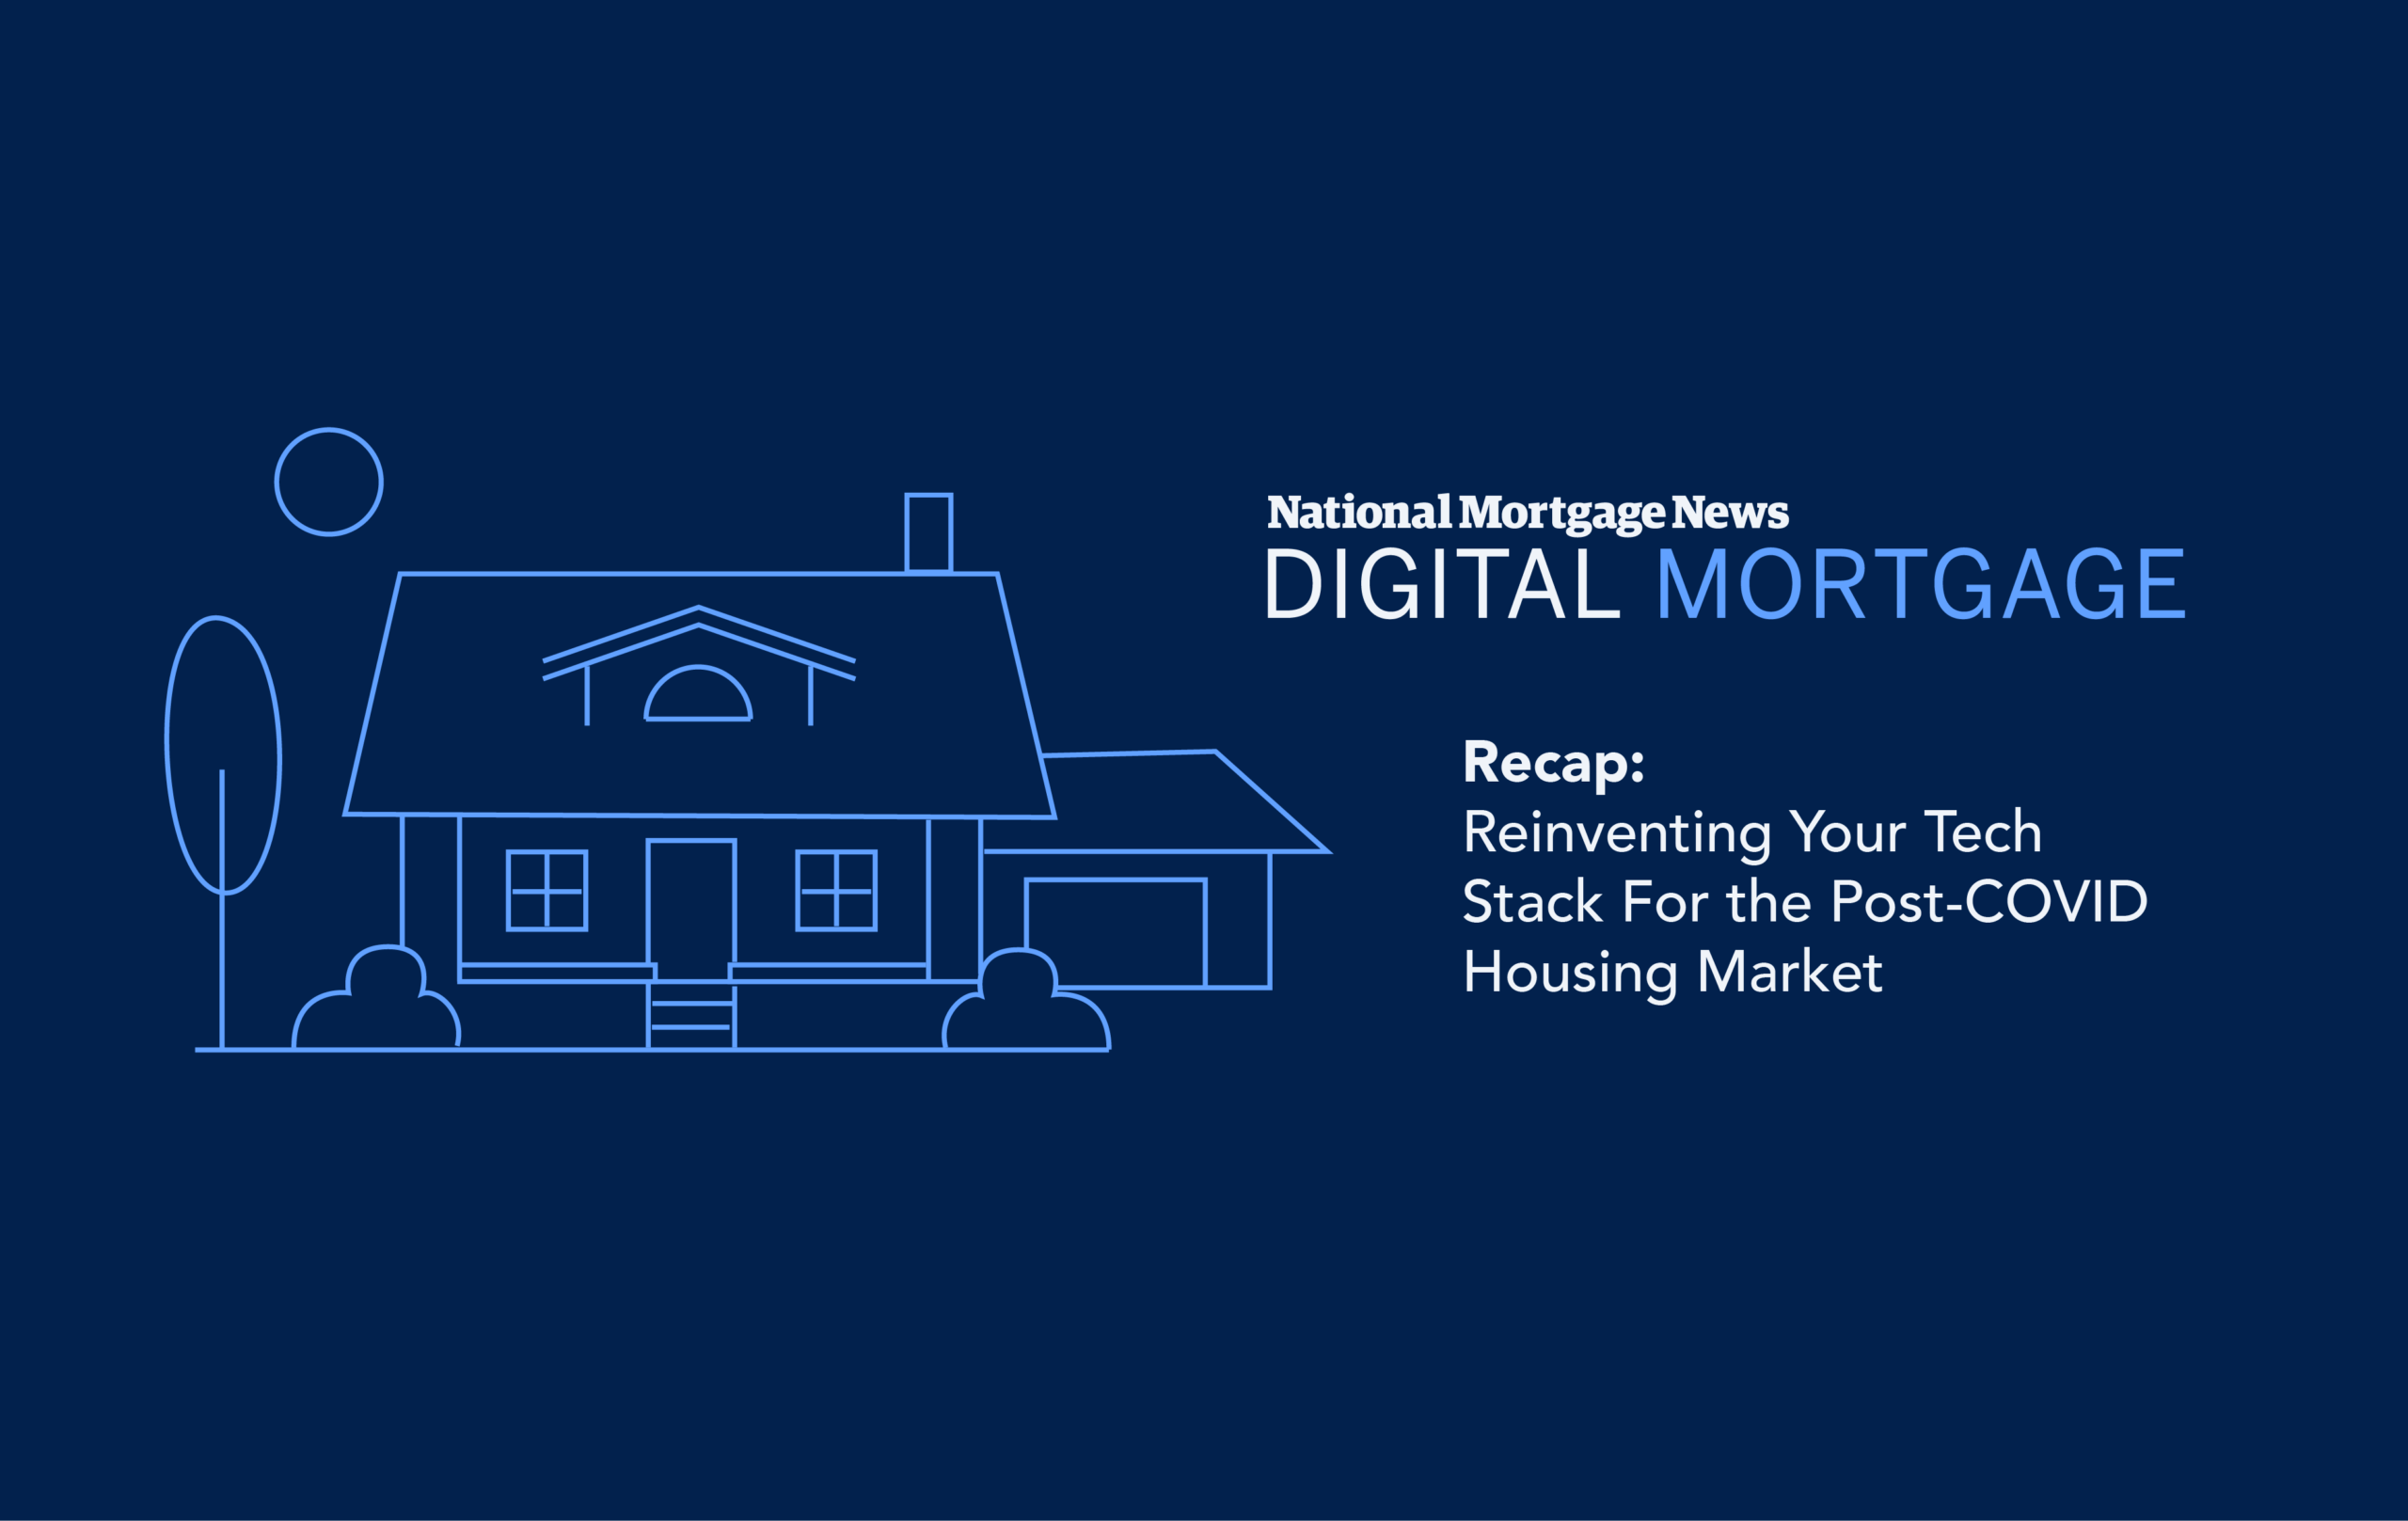 Recap: Reinventing Your Tech Stack For the Post-COVID Housing Market